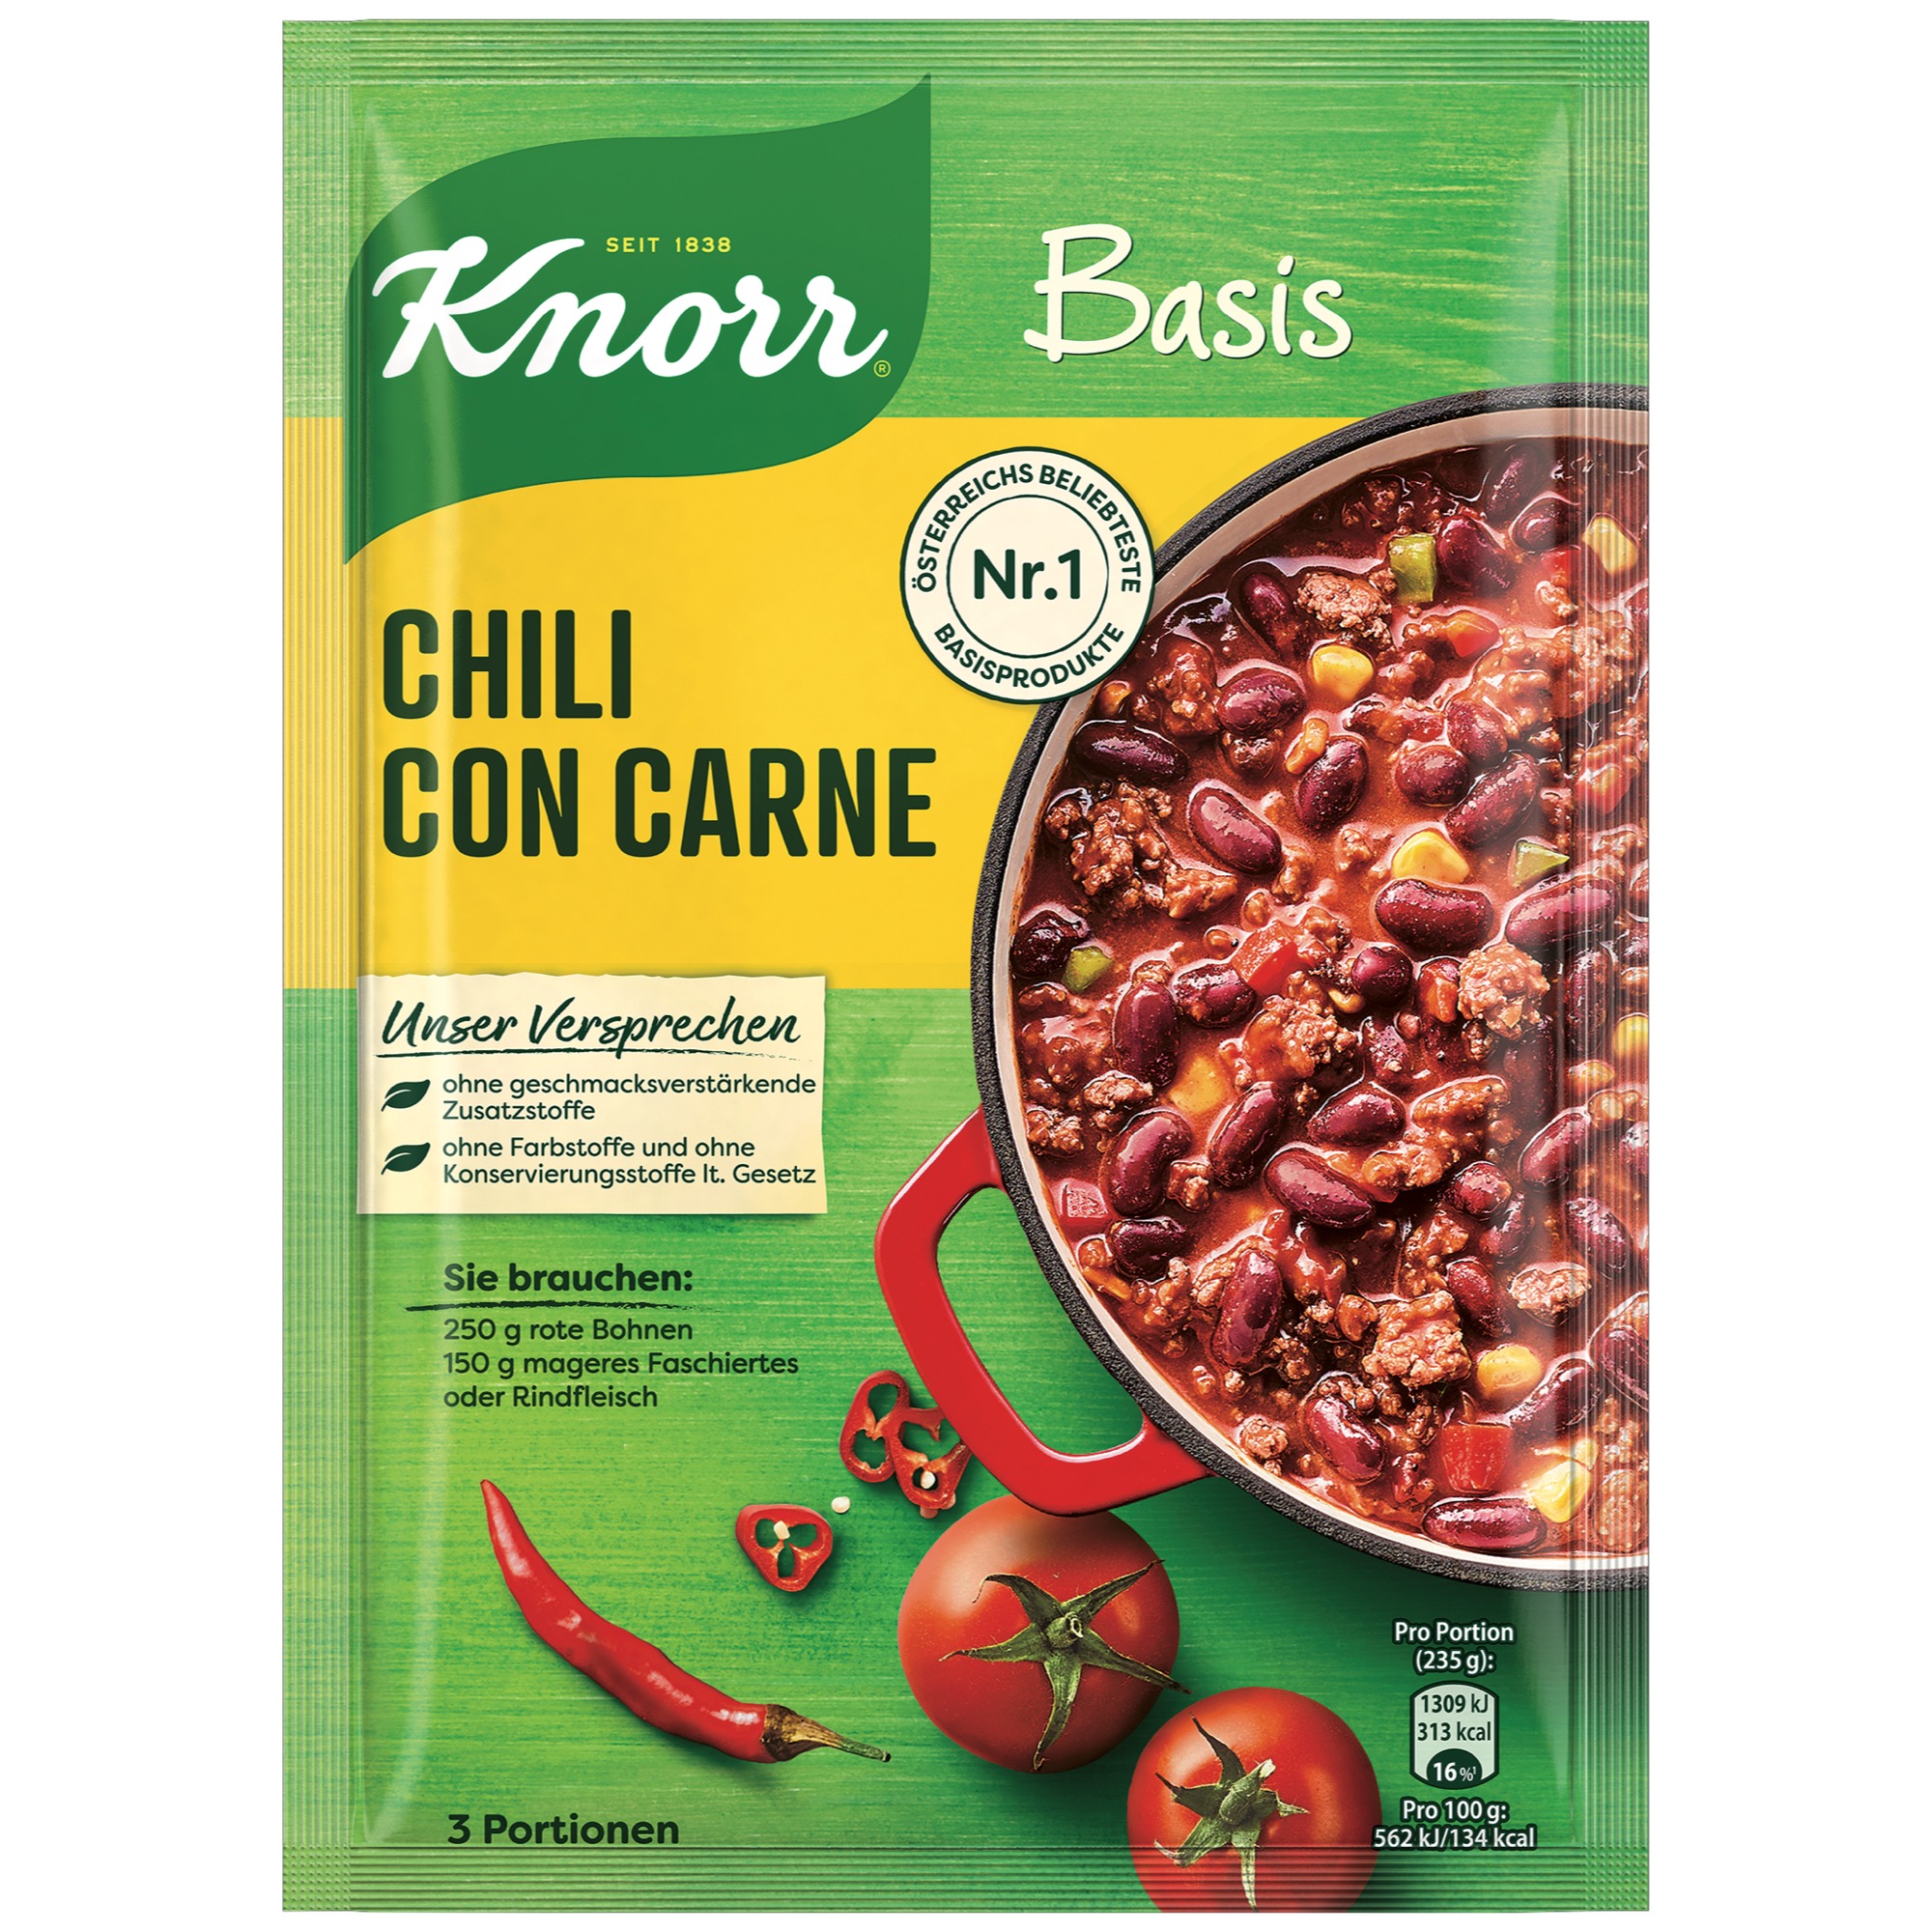 Knorr Basis Chili con Carne